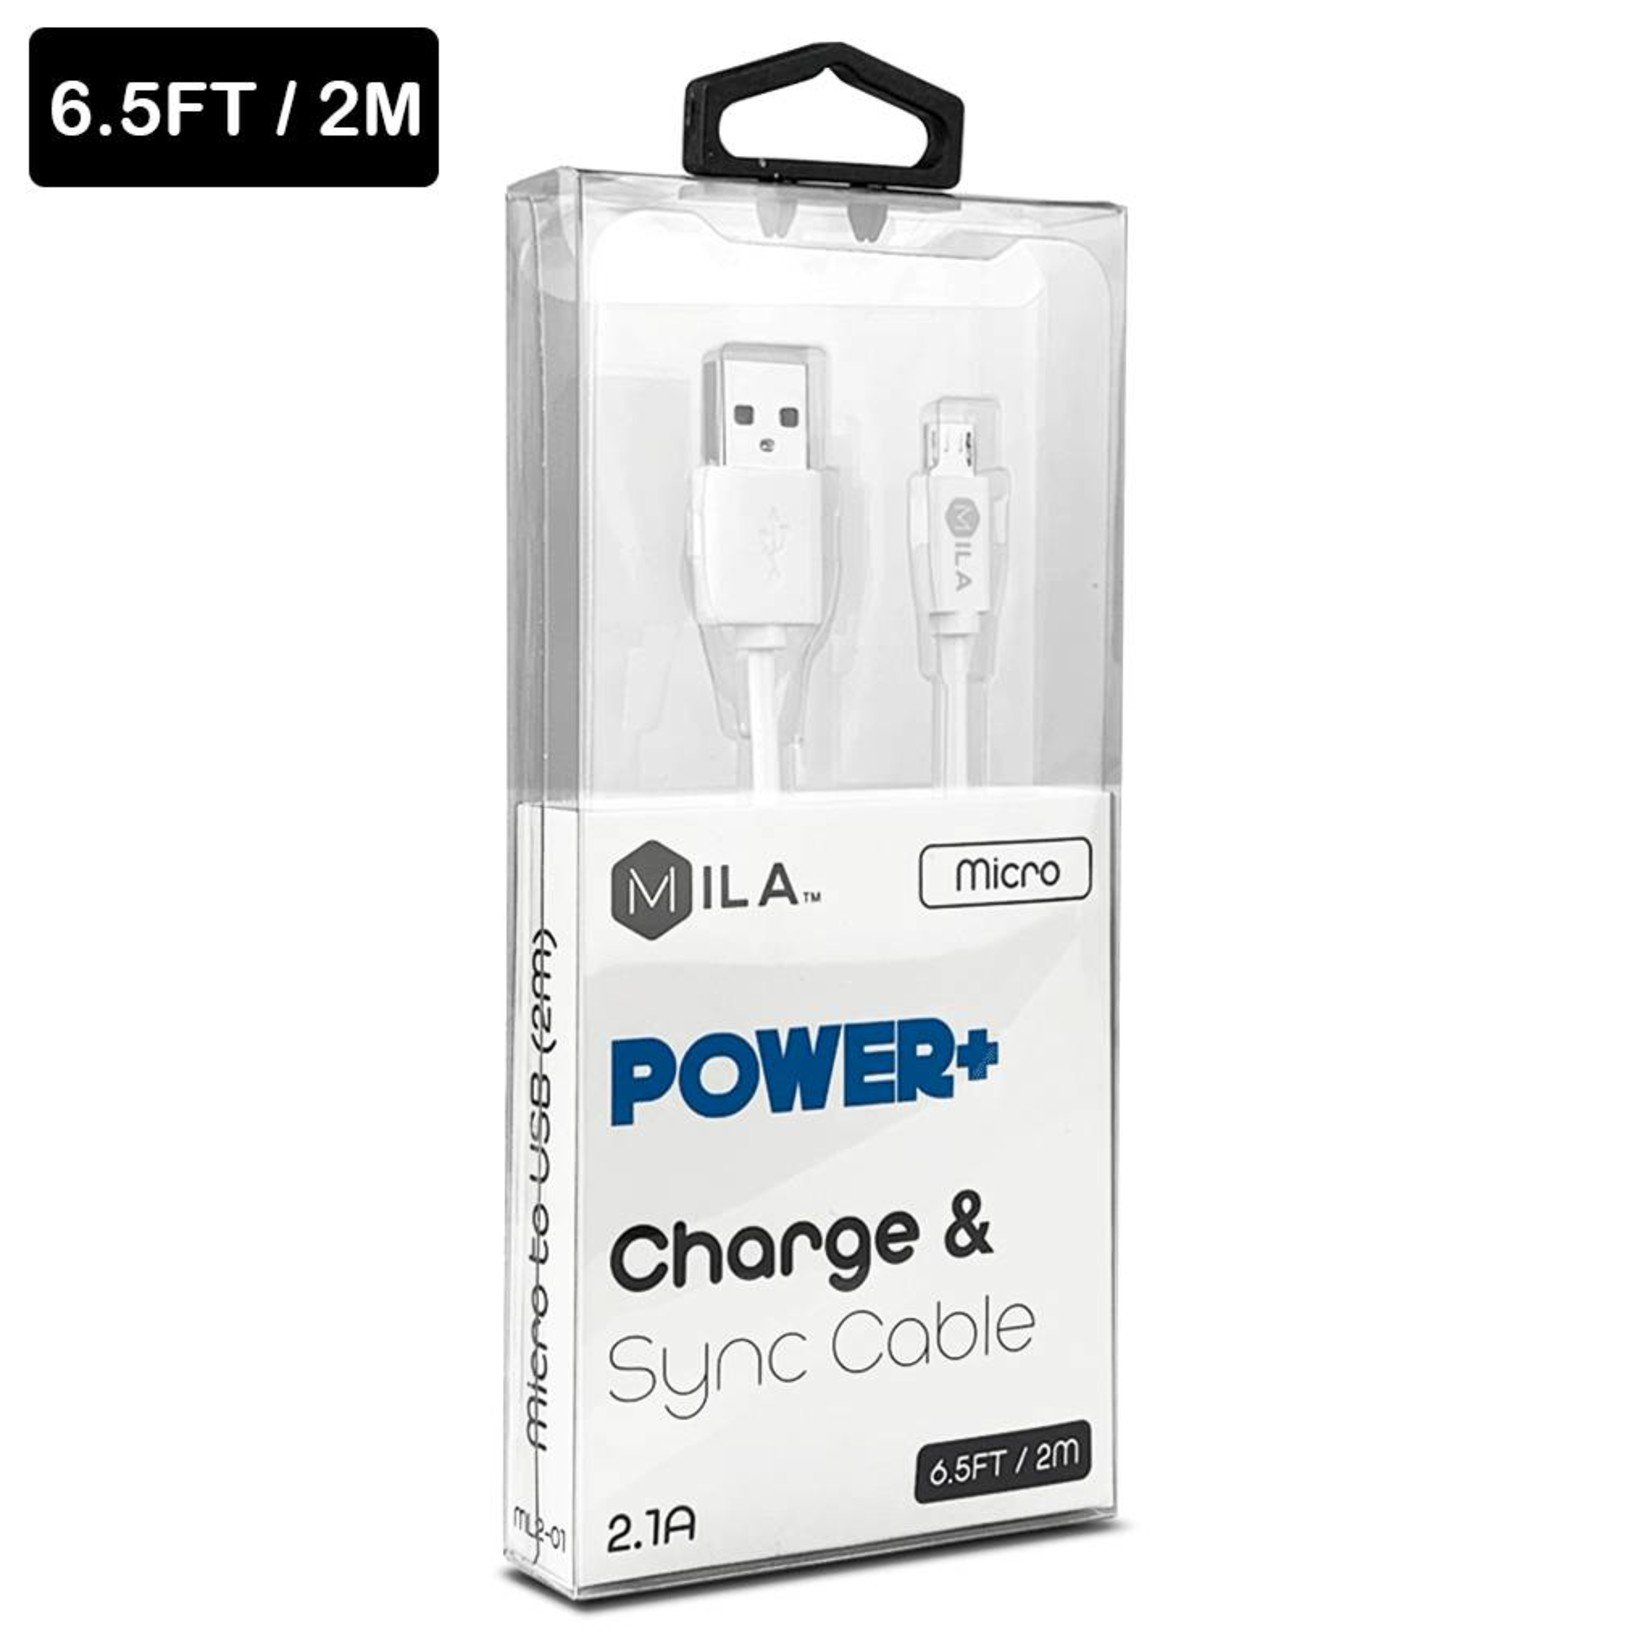 MILA | Micro V9 POWER+ Charge & Sync Cable